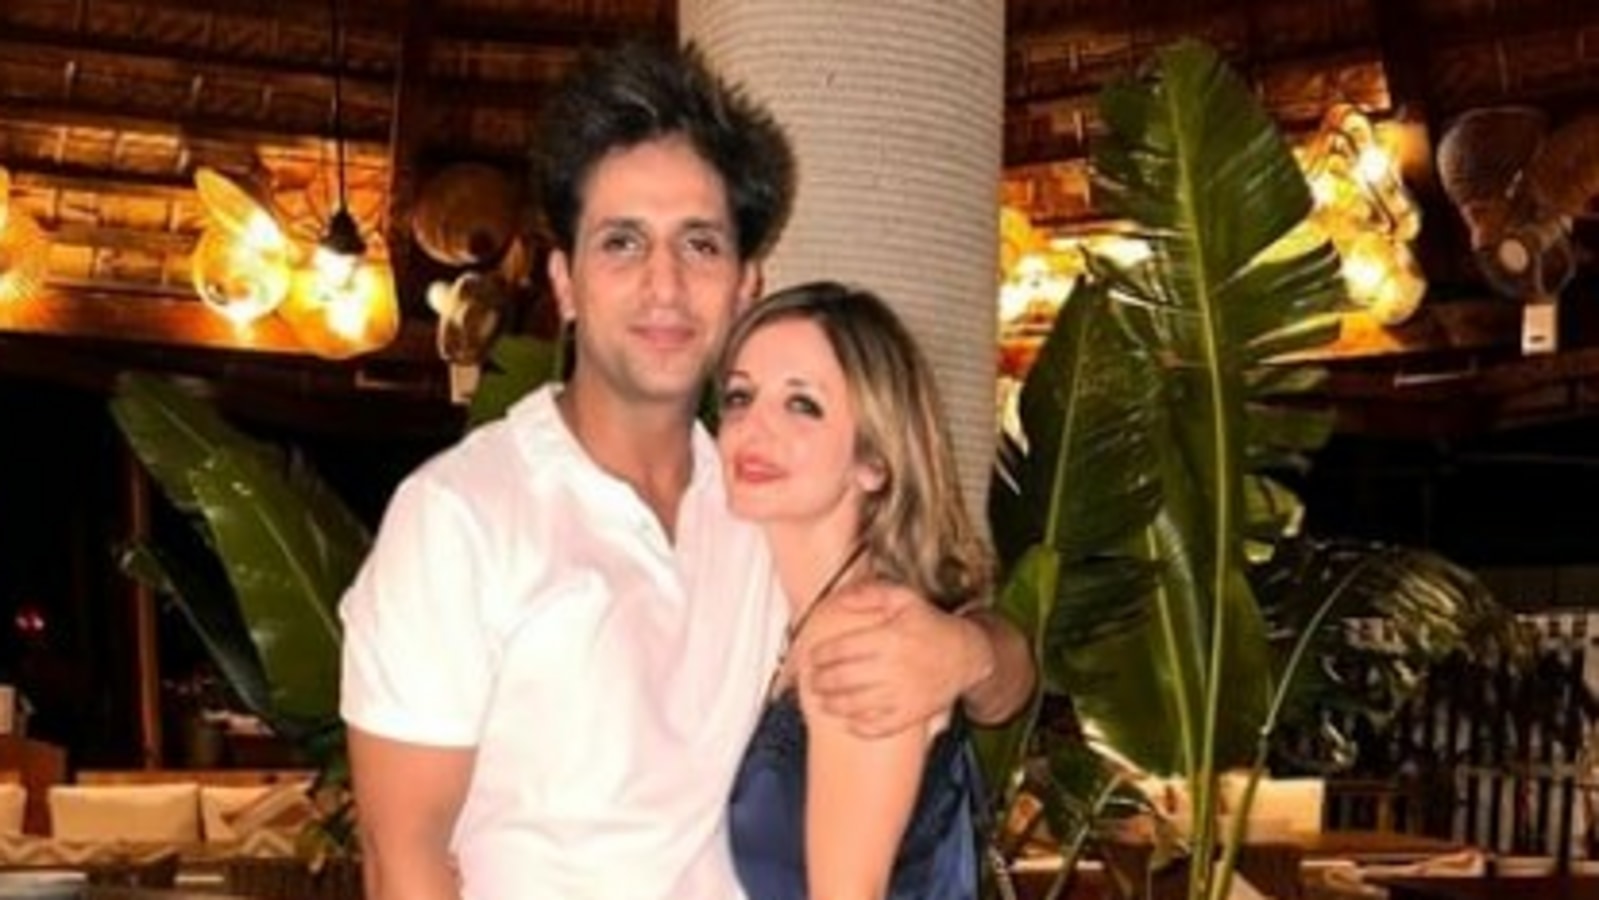 Sussanne Khan gets cute birthday wish from boyfriend Arslan Goni via special video, she reveals his nickname. Watch